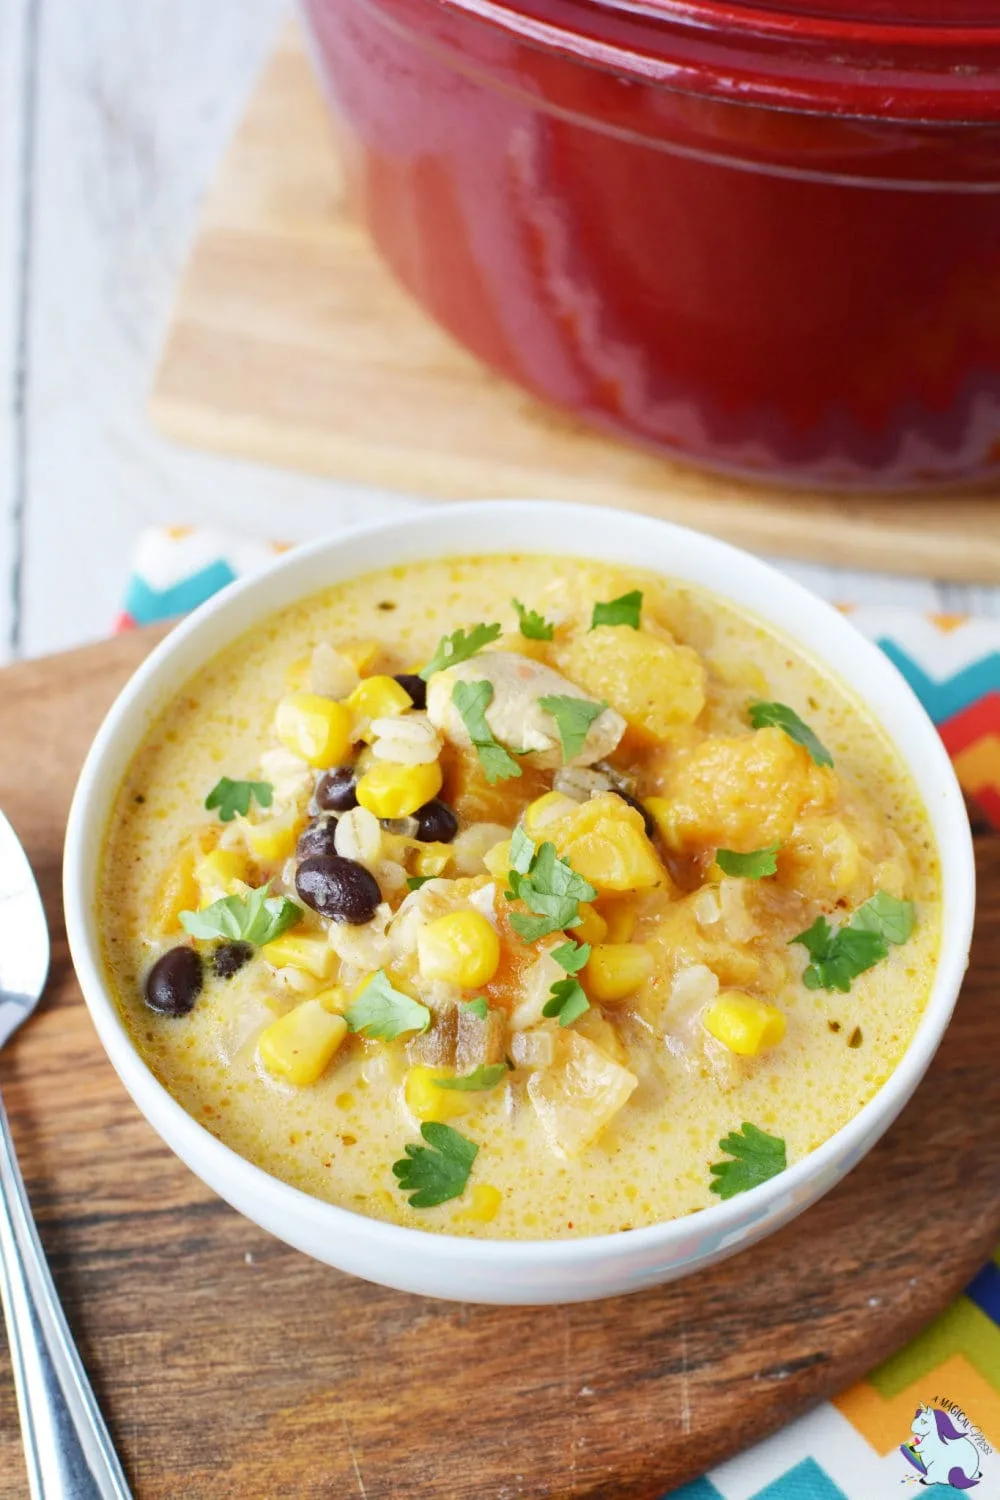 Chicken Corn Chowder with butternut squash and black beans